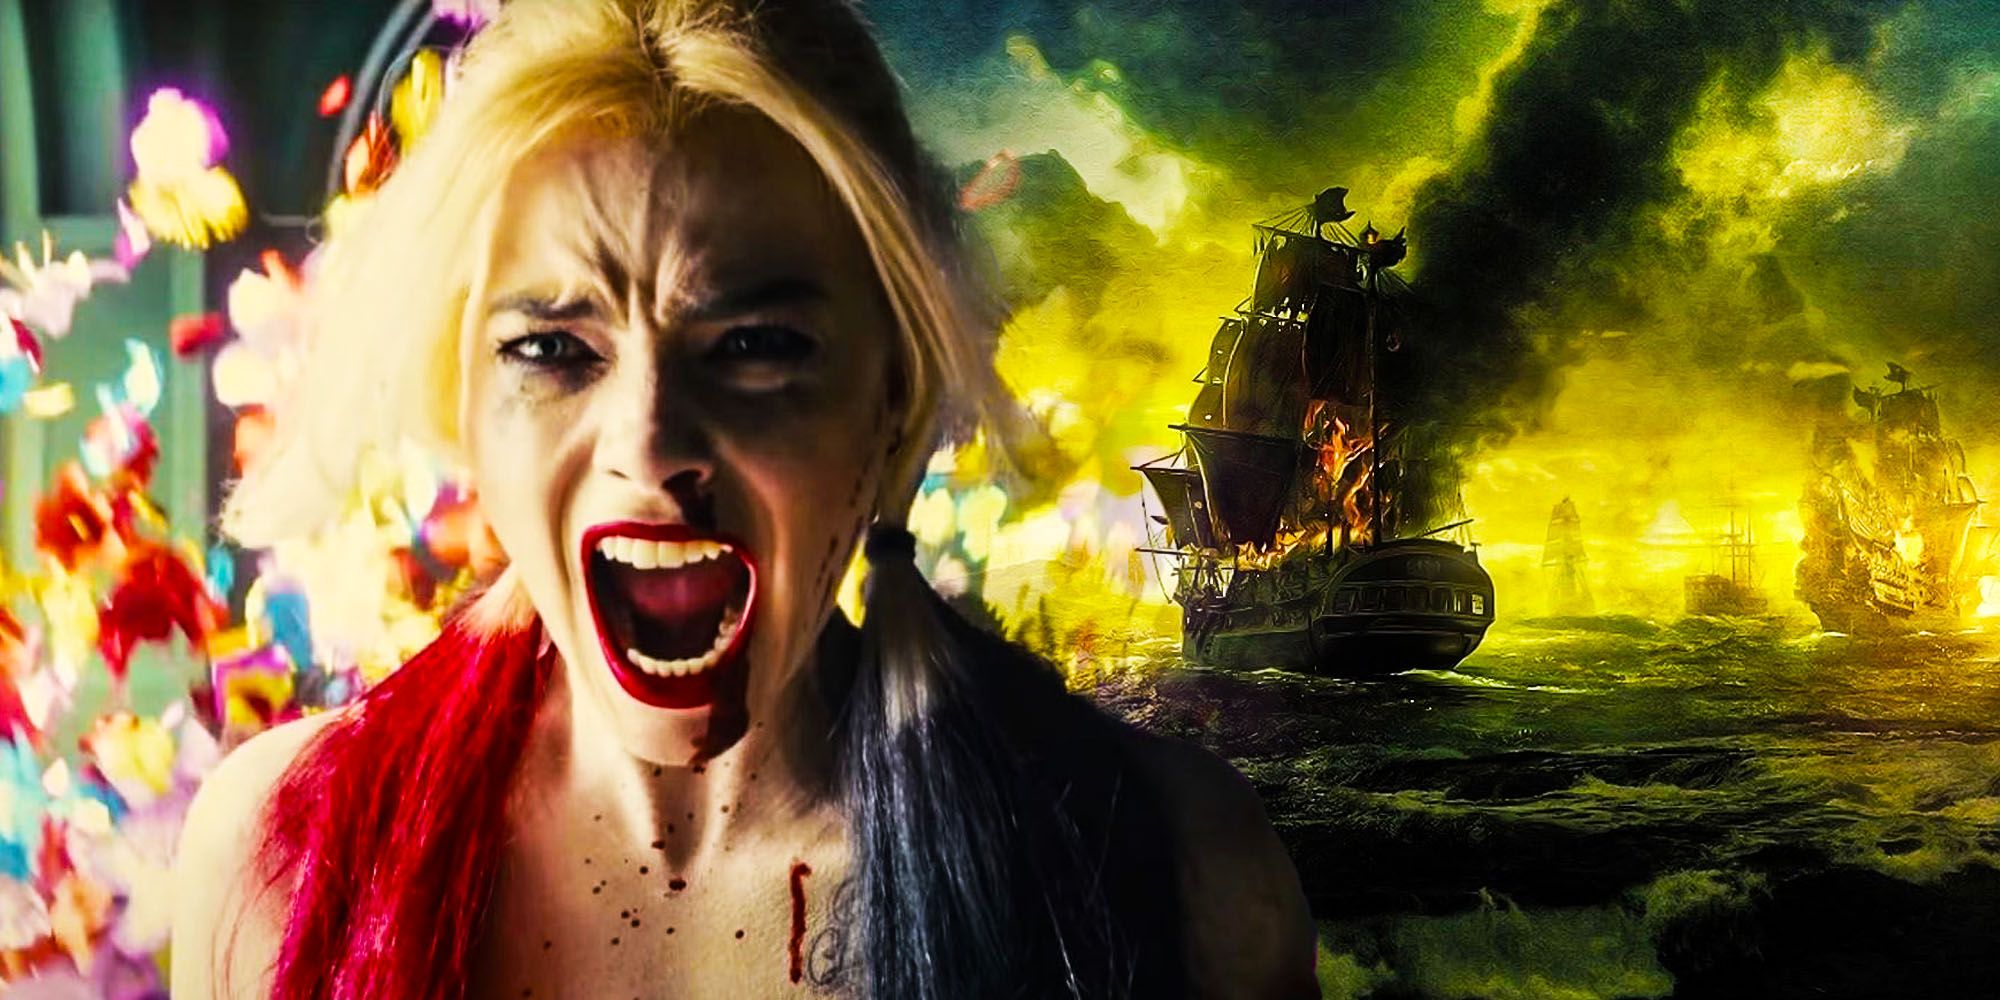 Margot Robbie Harley Quinn The suicide Squad Pirates of the Caribbean Reboot